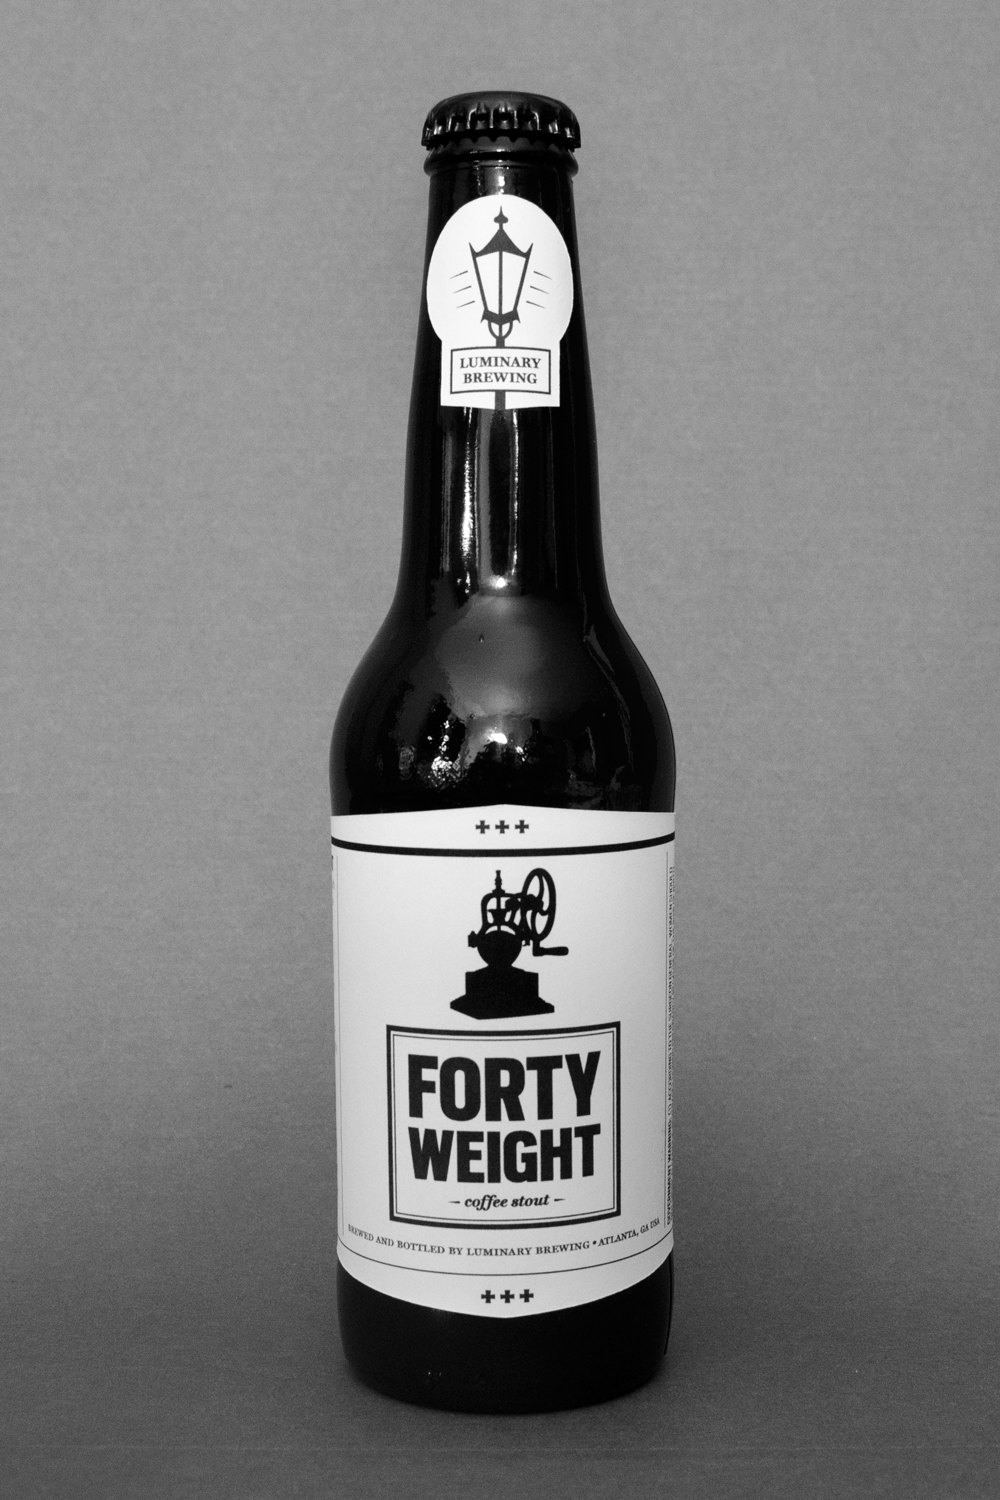 labels beer brew Luminary Luminary Brewing brewery forty weight bottle beer bottle 1800's Coffee coffee stout stout